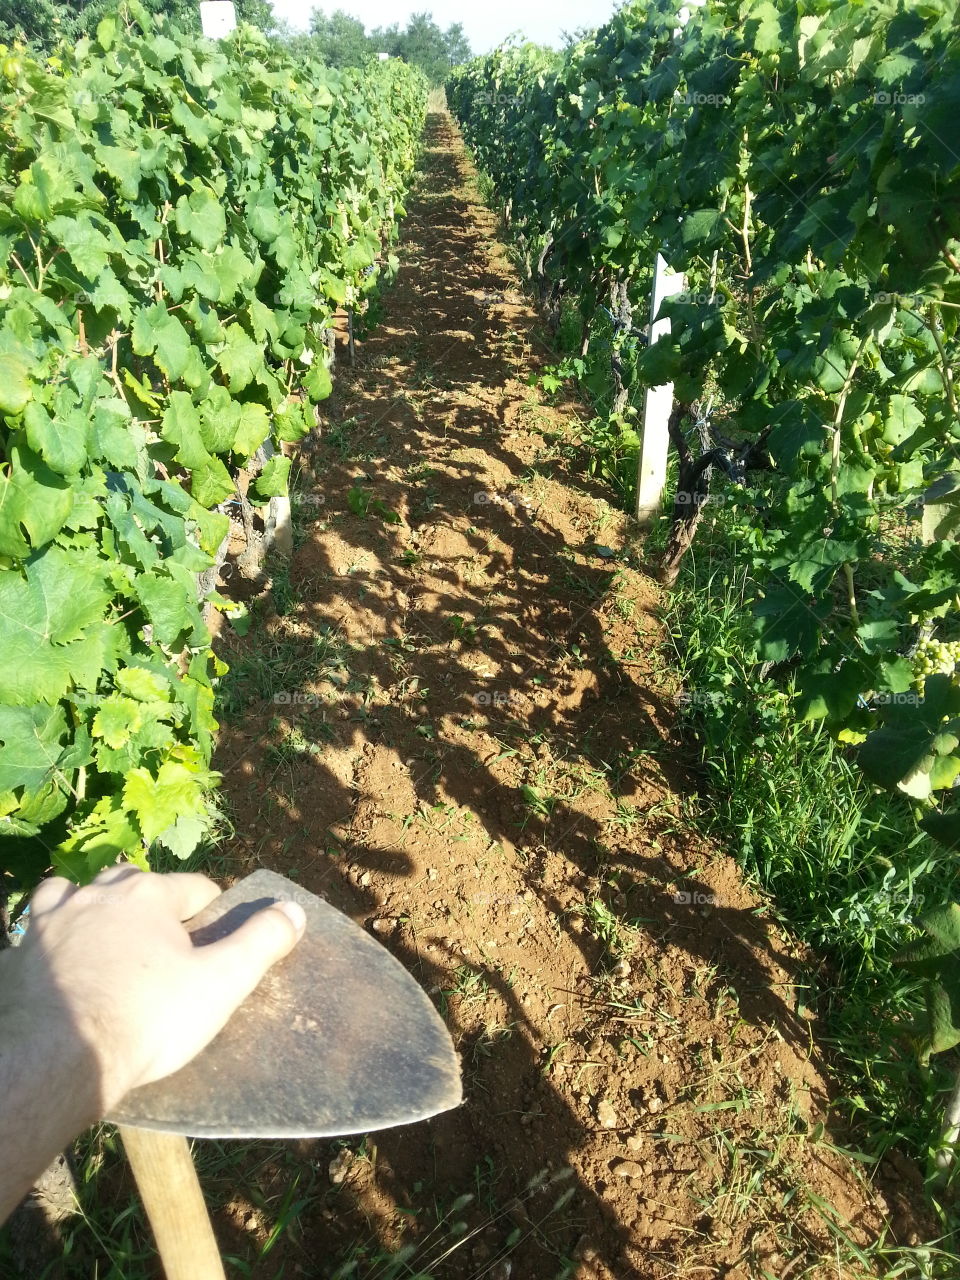 A workday in the vineyard